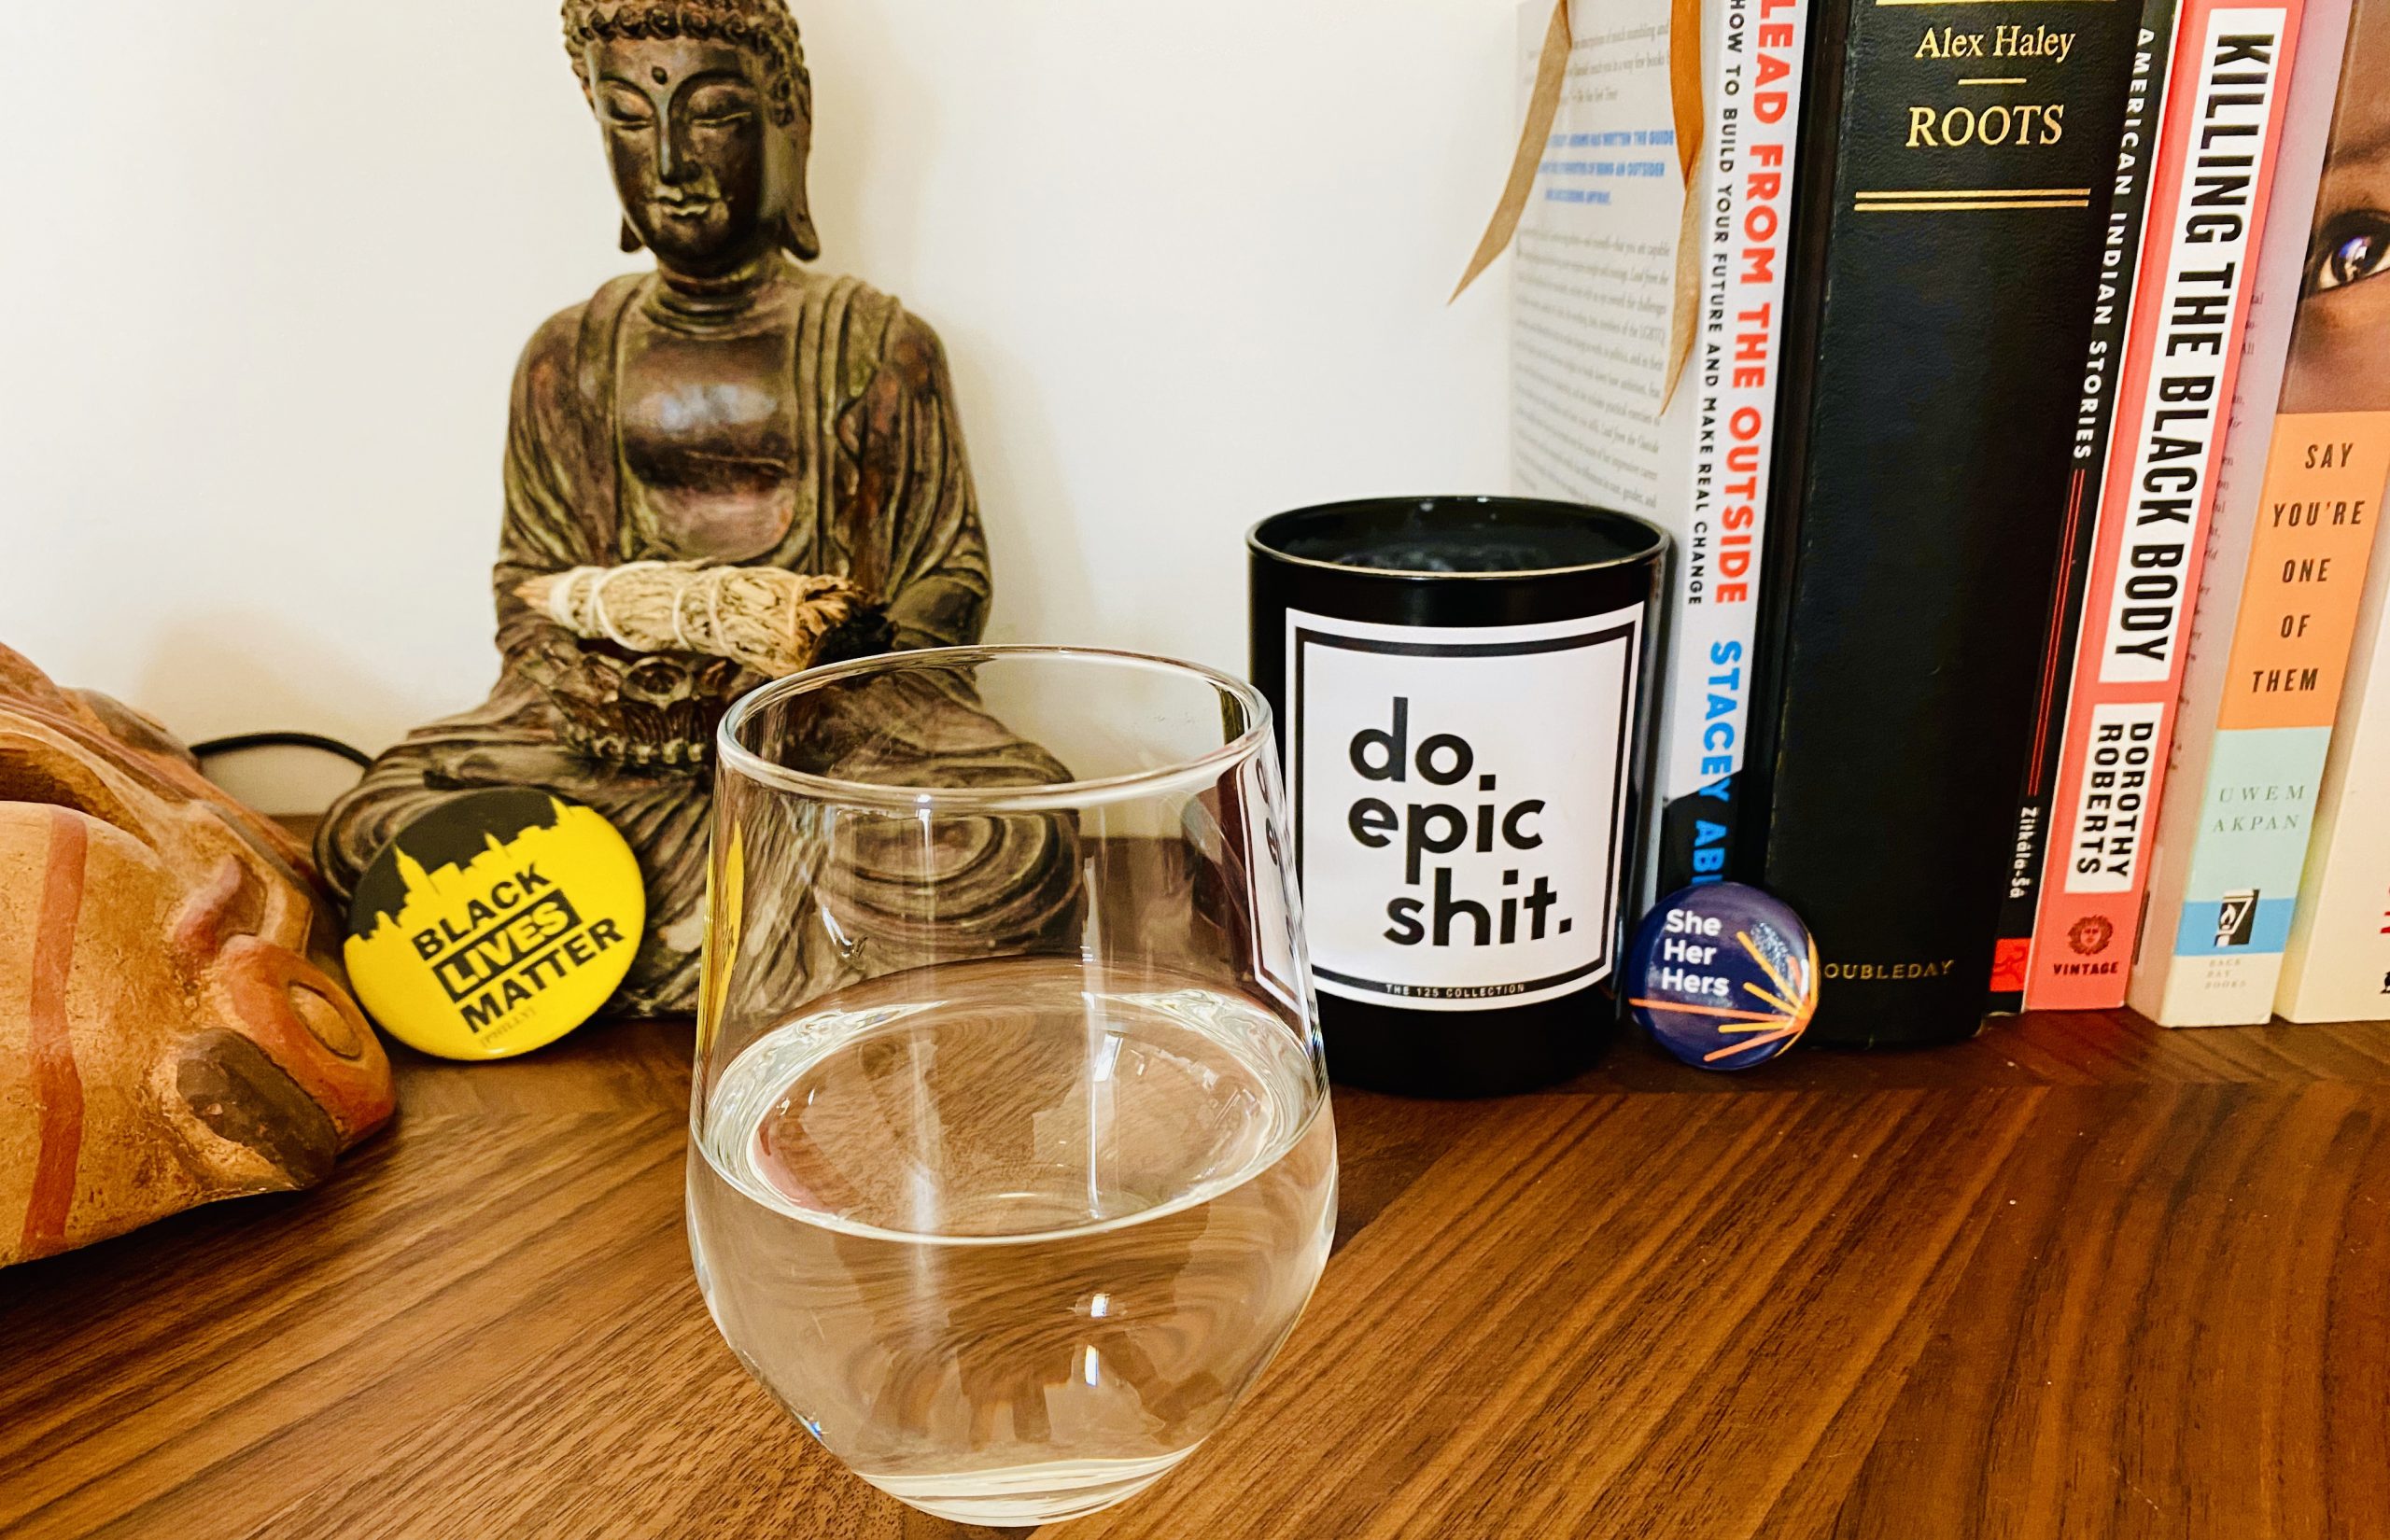 A glass of water that is half full (or empty), a mug with the caption "Do Epic Shit," a Black Lives Matter button leaning against a Buddha statue, and some books (Stavey Abrams's Lead From the Outside, Alex Haley's Roots, American Indian Stories, Dorothy Roberts's Killing the Black Body, and Uwem Akpan's Say You're One of Them), and another button ("She, Her, Hers") on a shelf in Anthony Tidd's home.